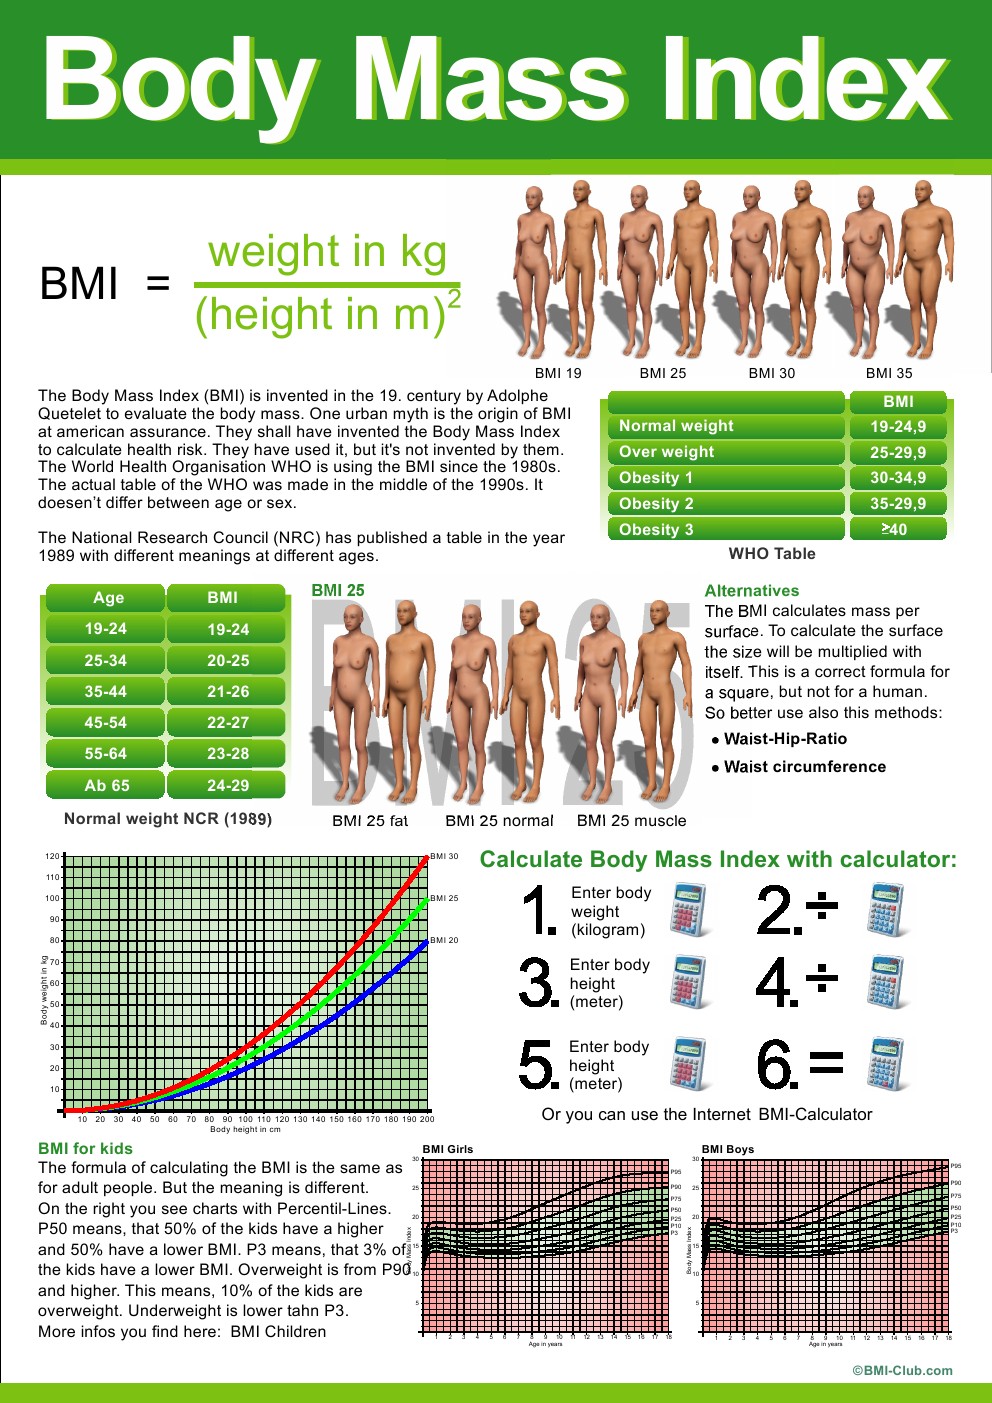 ALREADY GET YOUR BMI, NOW CHECK IT !